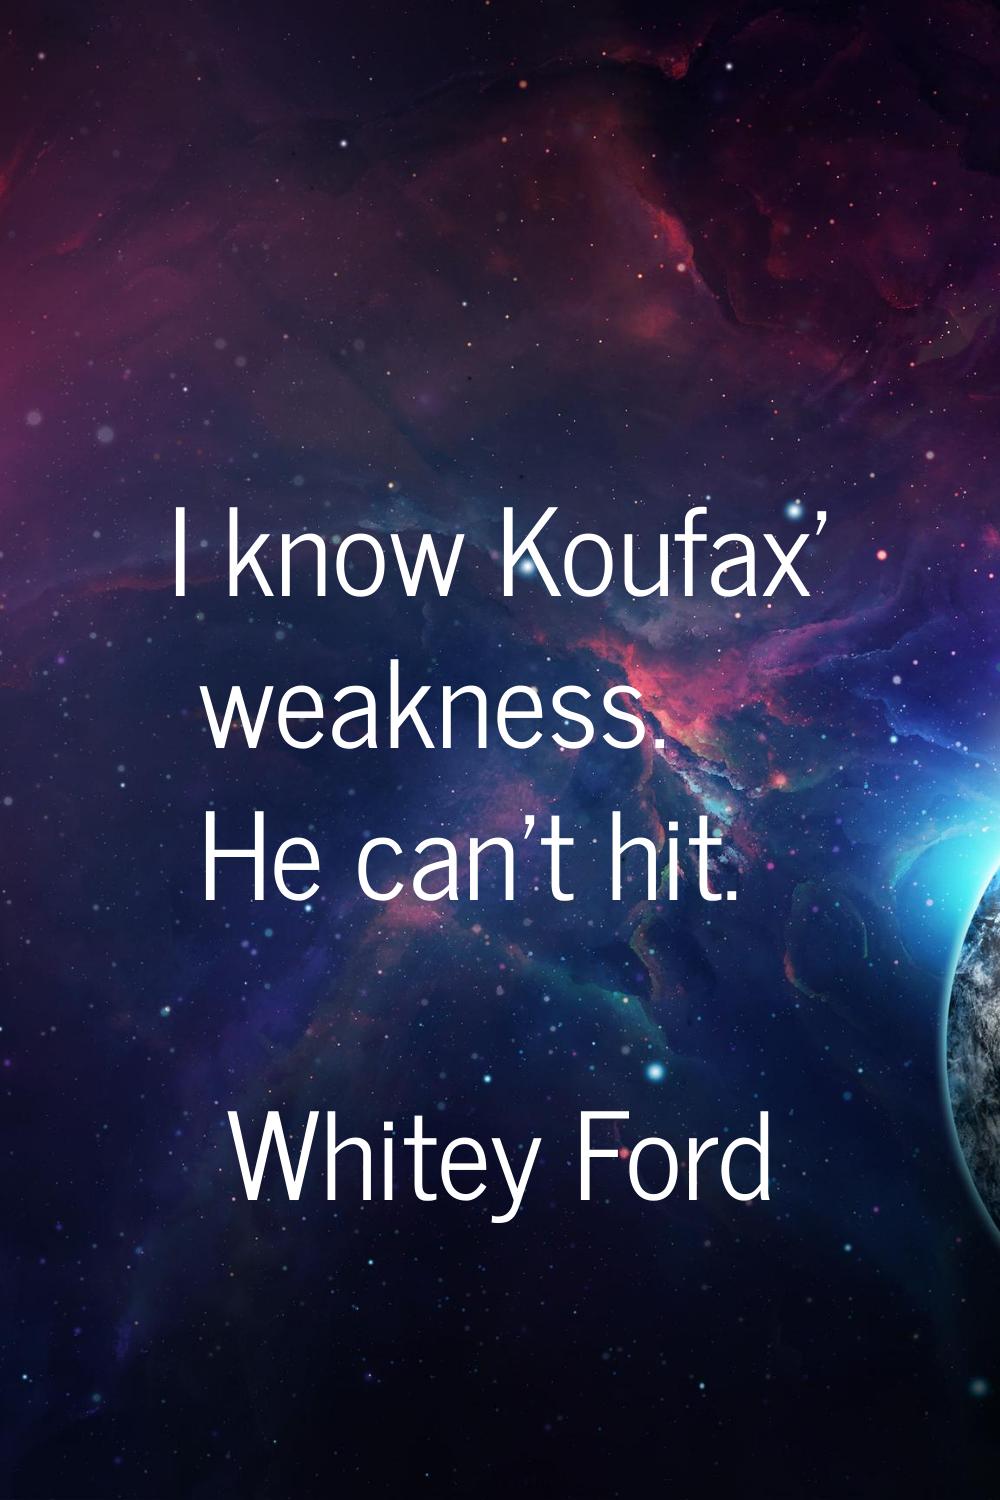 I know Koufax' weakness. He can't hit.